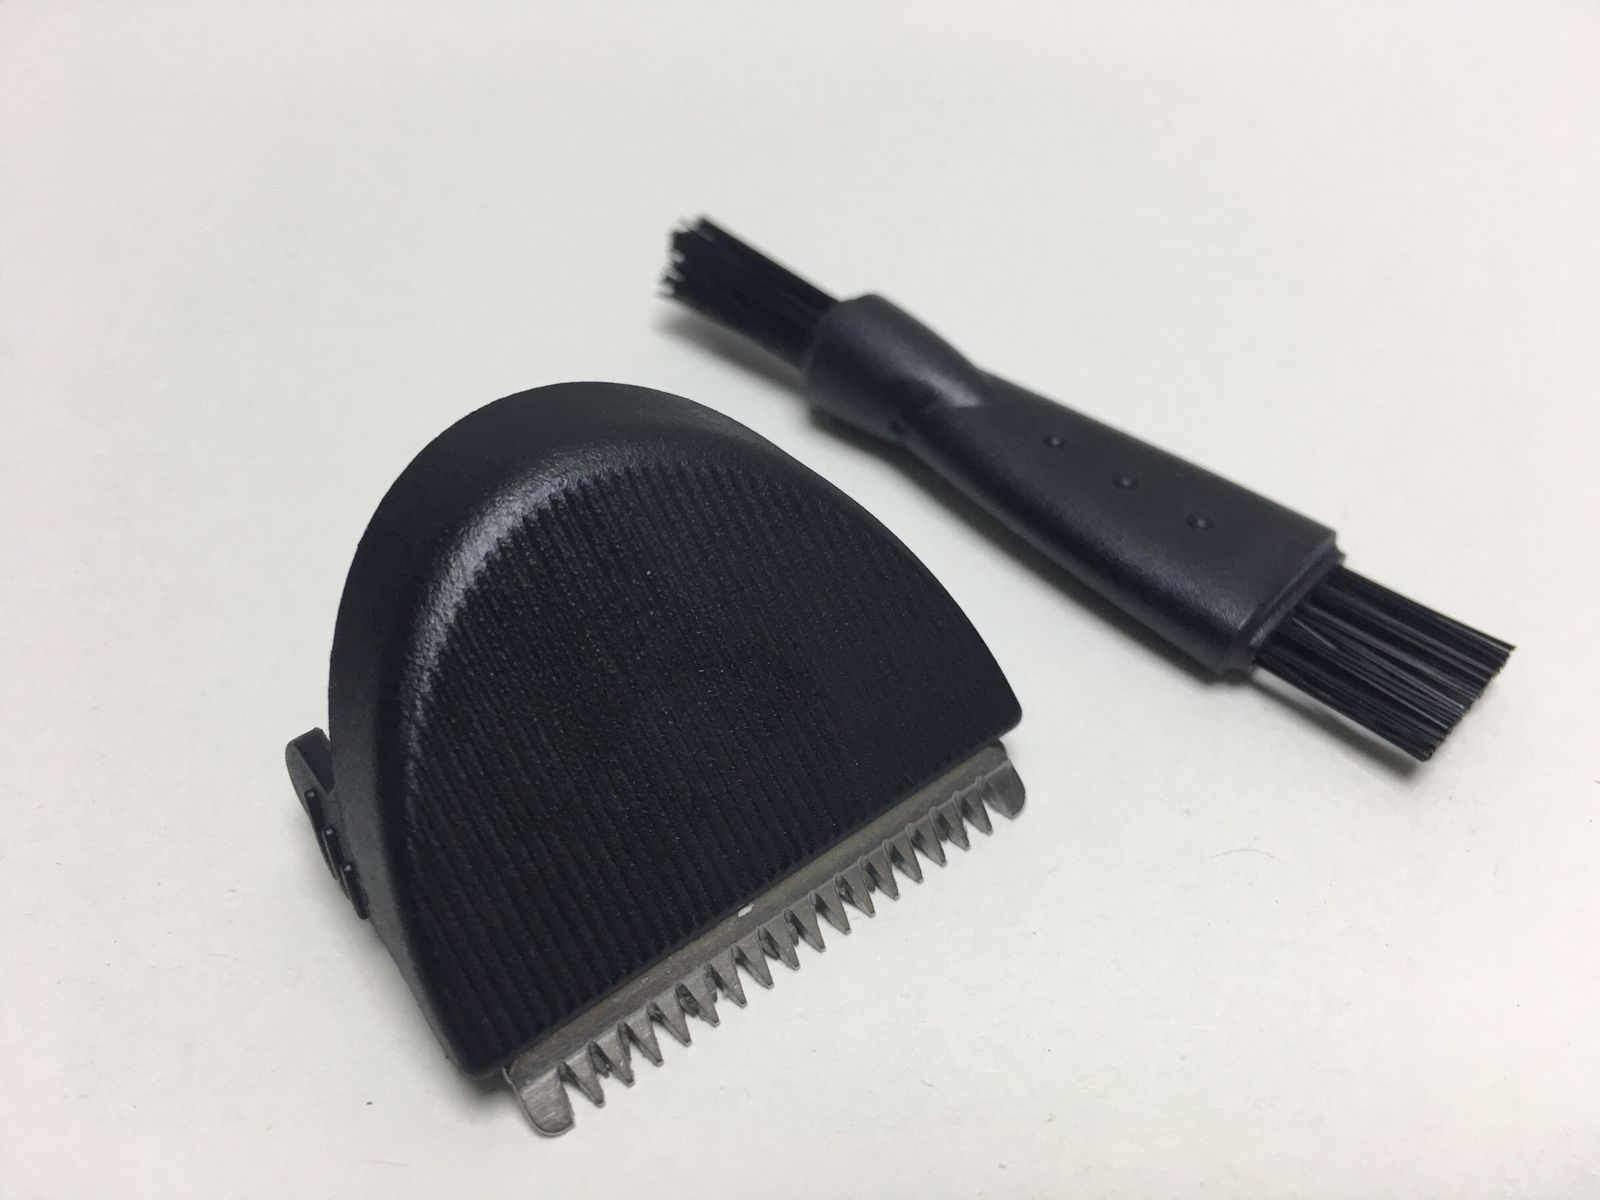 Primary image for Hair Clipper Trimmer Head Cutter Blade Razor For Philips COMB QT4075 QT4075/ 32